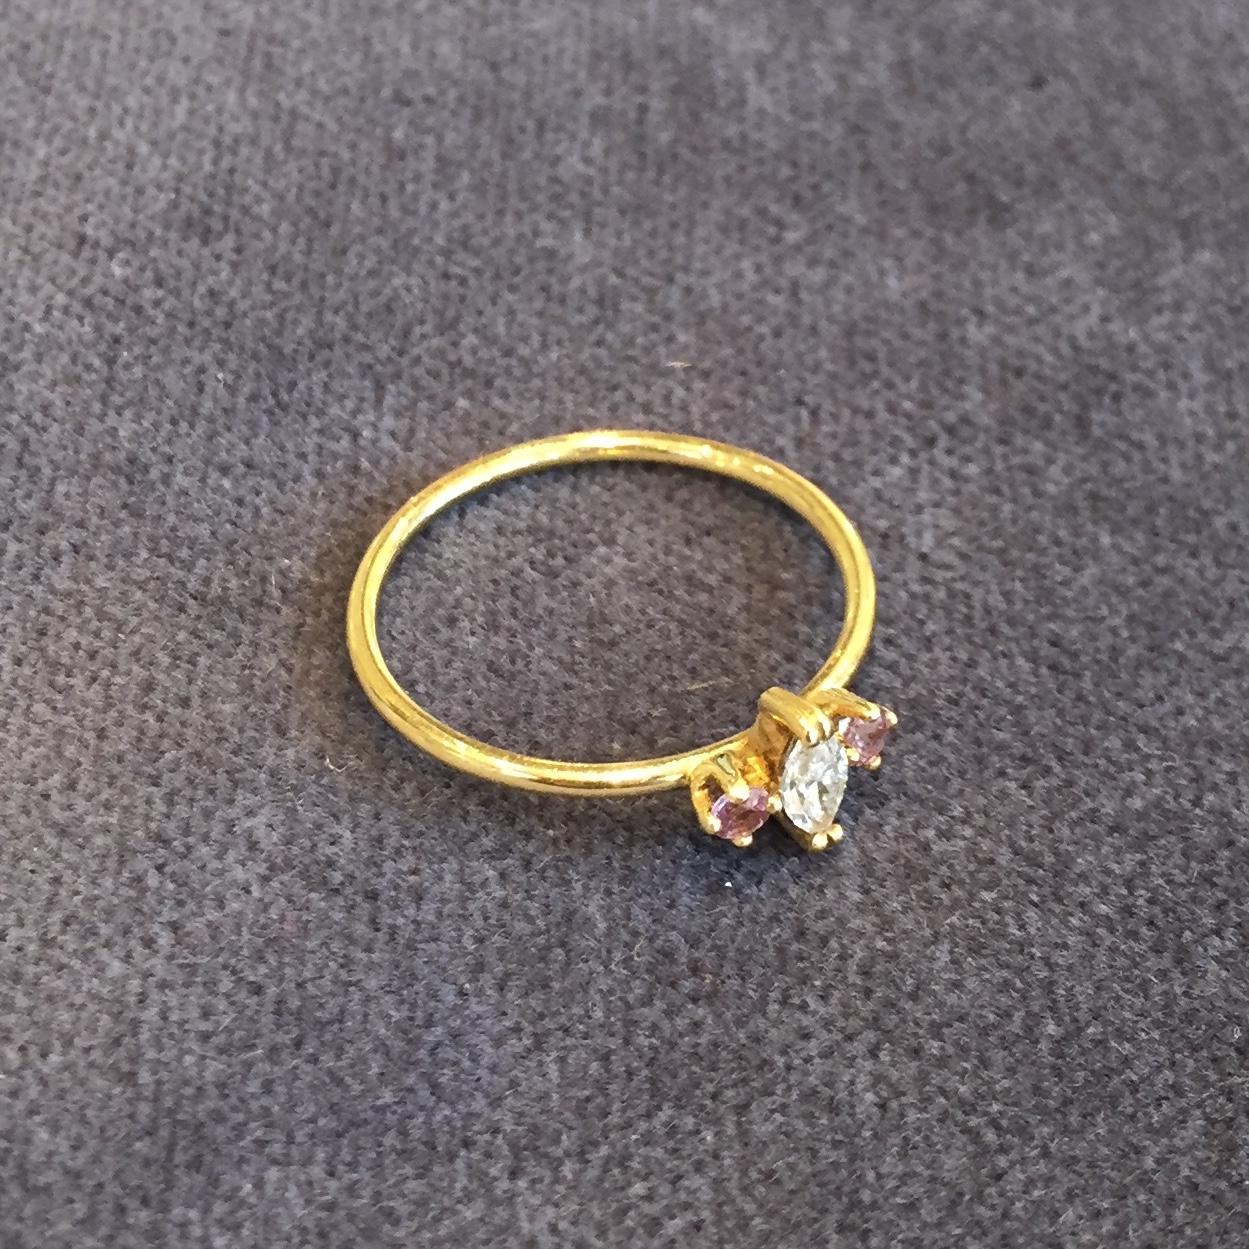 With a marquise cut 0.12carat white diamond claw set with brilliant cut 0.04carat soft pink sapphires either side perfectly balance on a polished 18k yellow gold 1.2mm band. This ring is a UK ring size L, but can be made to order in any size. Please